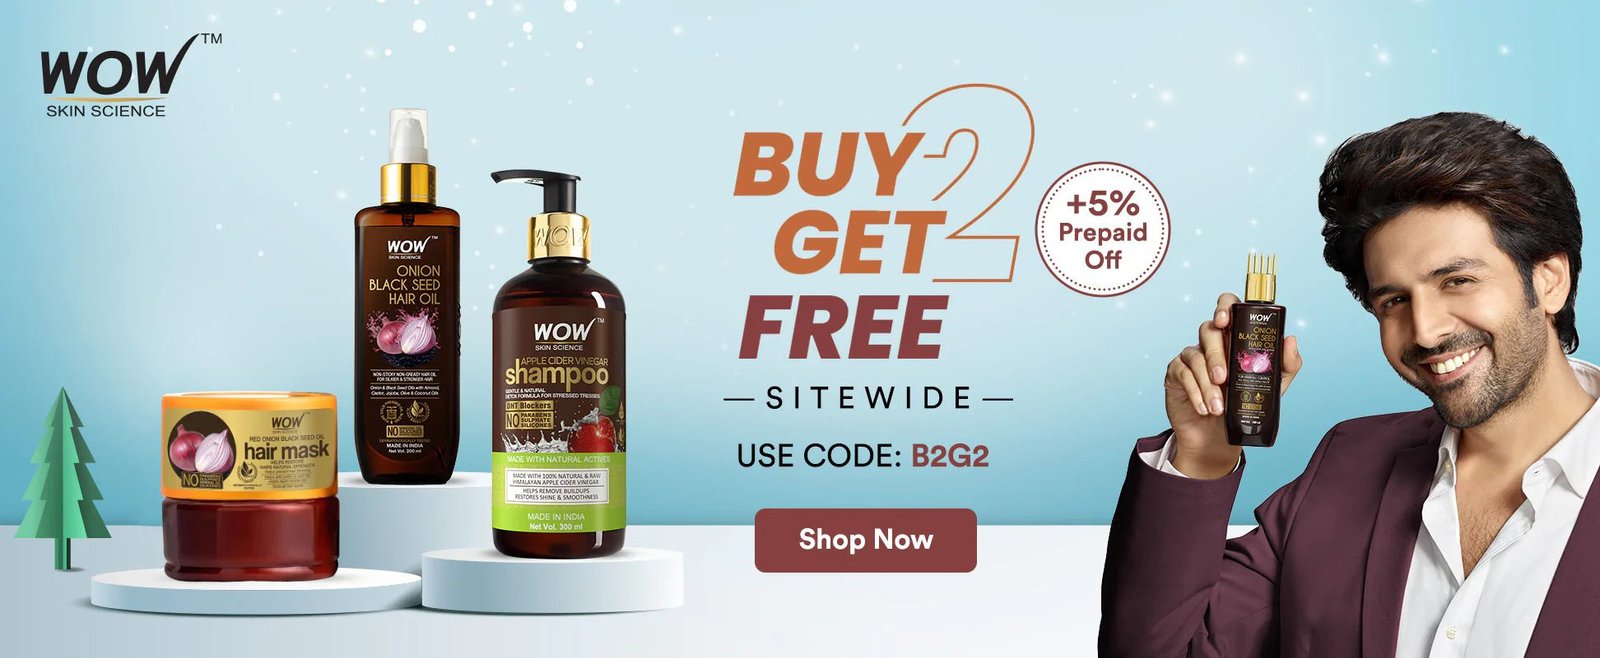 WOW Buy 2 Get 2 FREE Offer